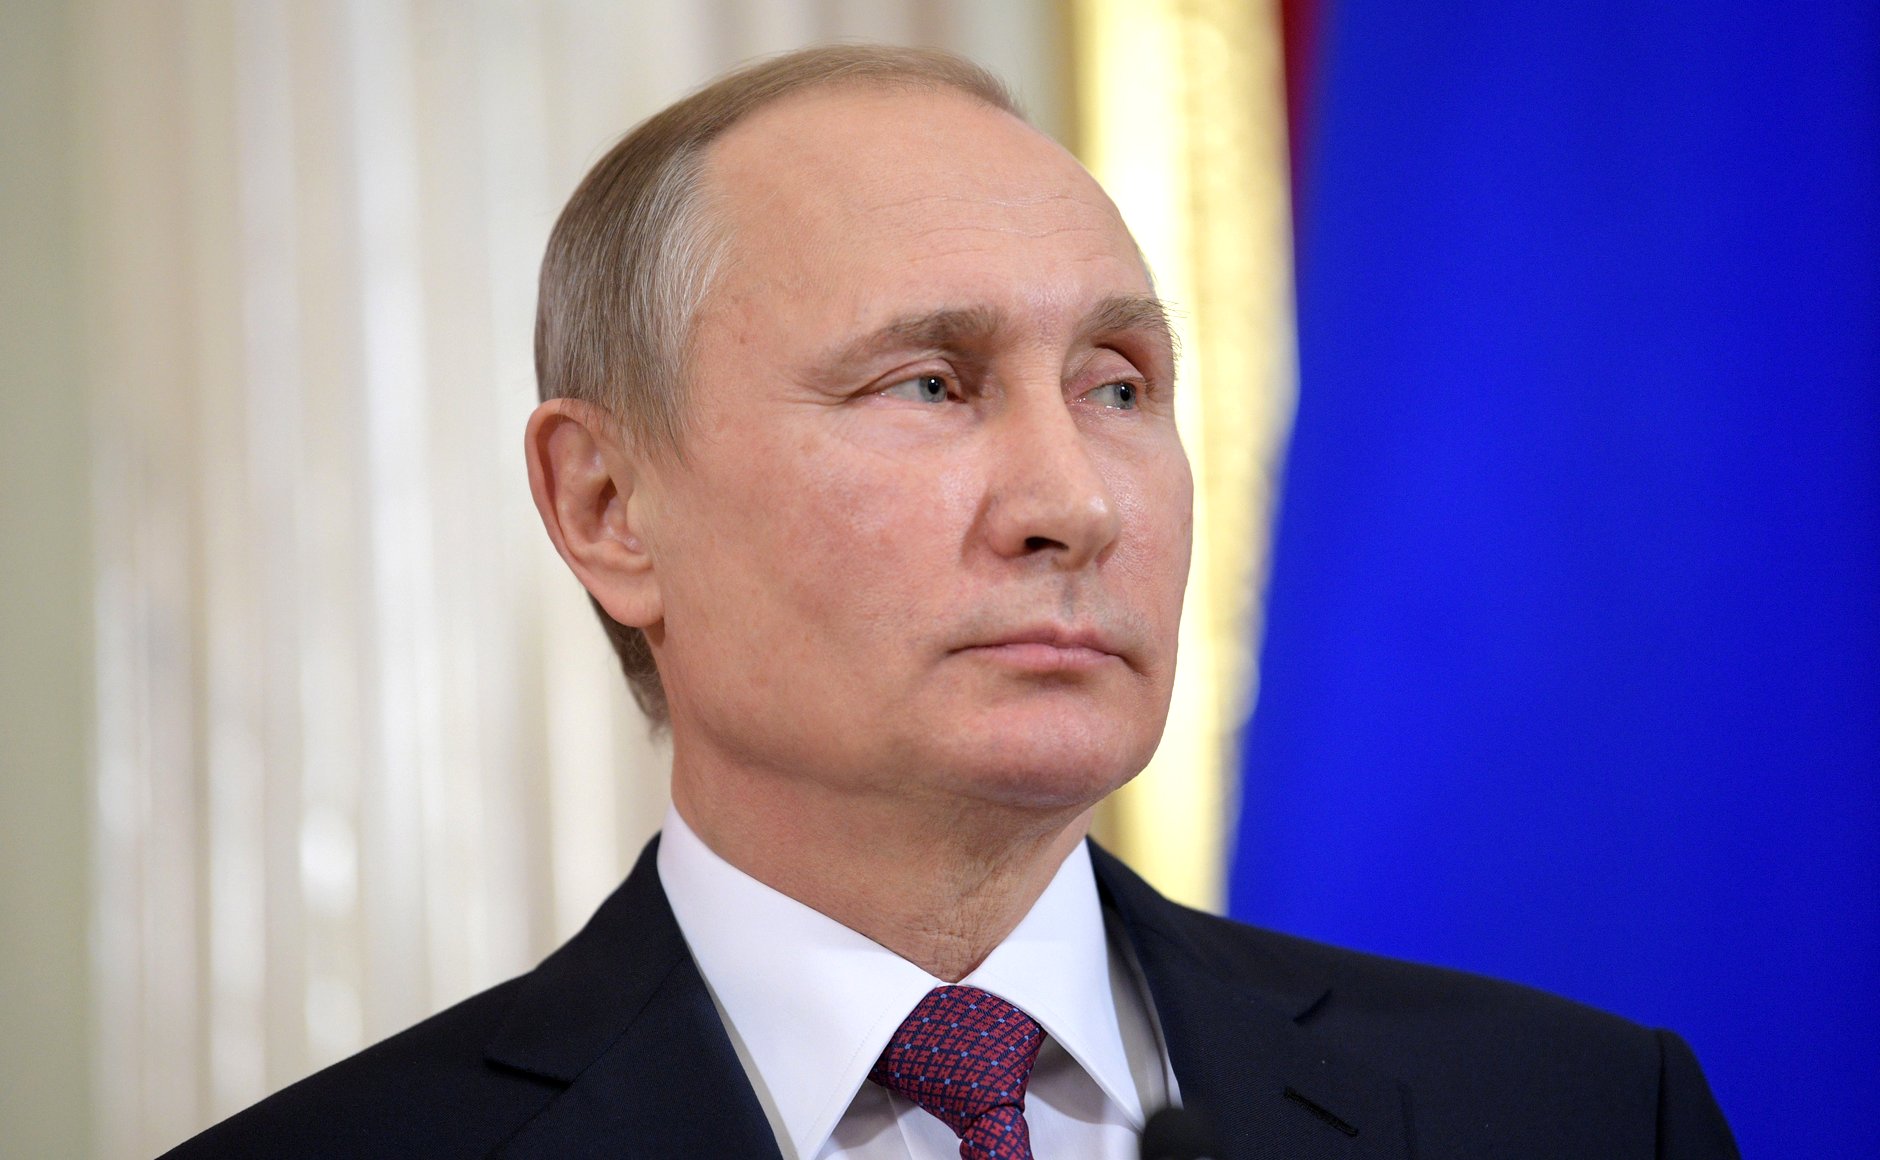 Russia reciprocates and finally suspends INF treaty with US, says Putin